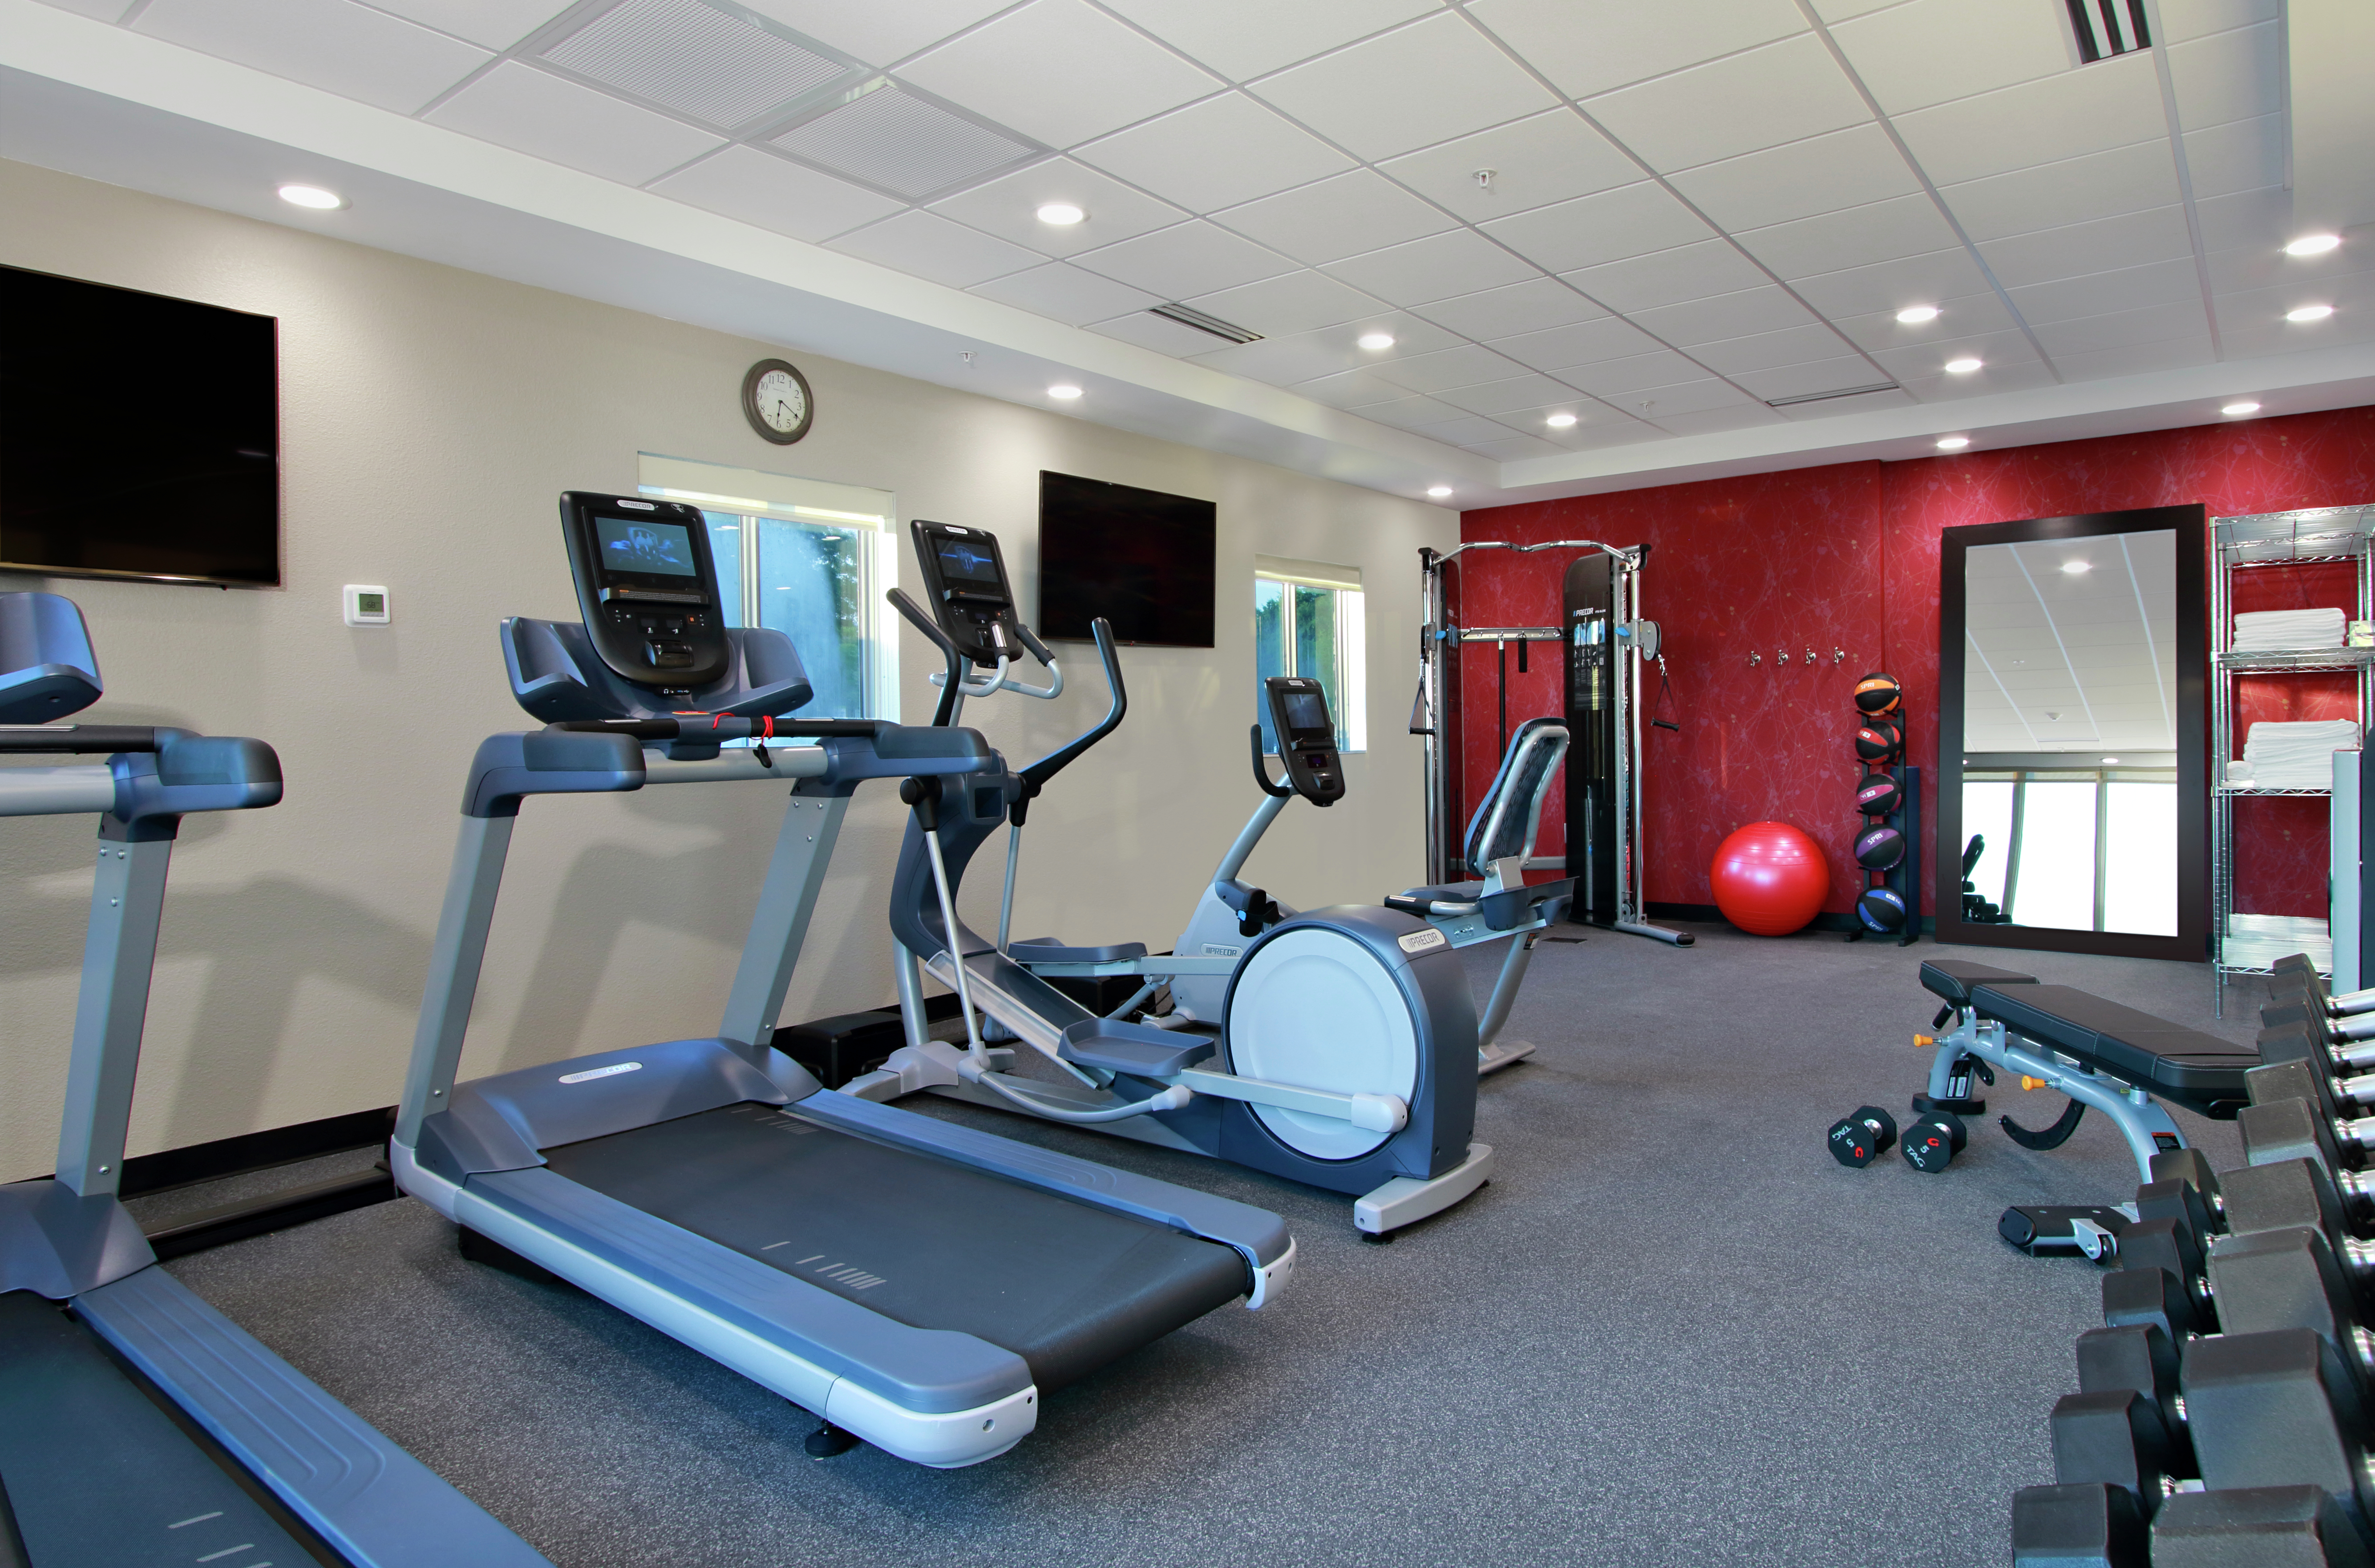 Fitness Center With TVs,  Cardio Equipment, Weight Machine, Red Stability Ball, Weight Balls, Large Mirror, Towel Station, Bench, and Free Weights